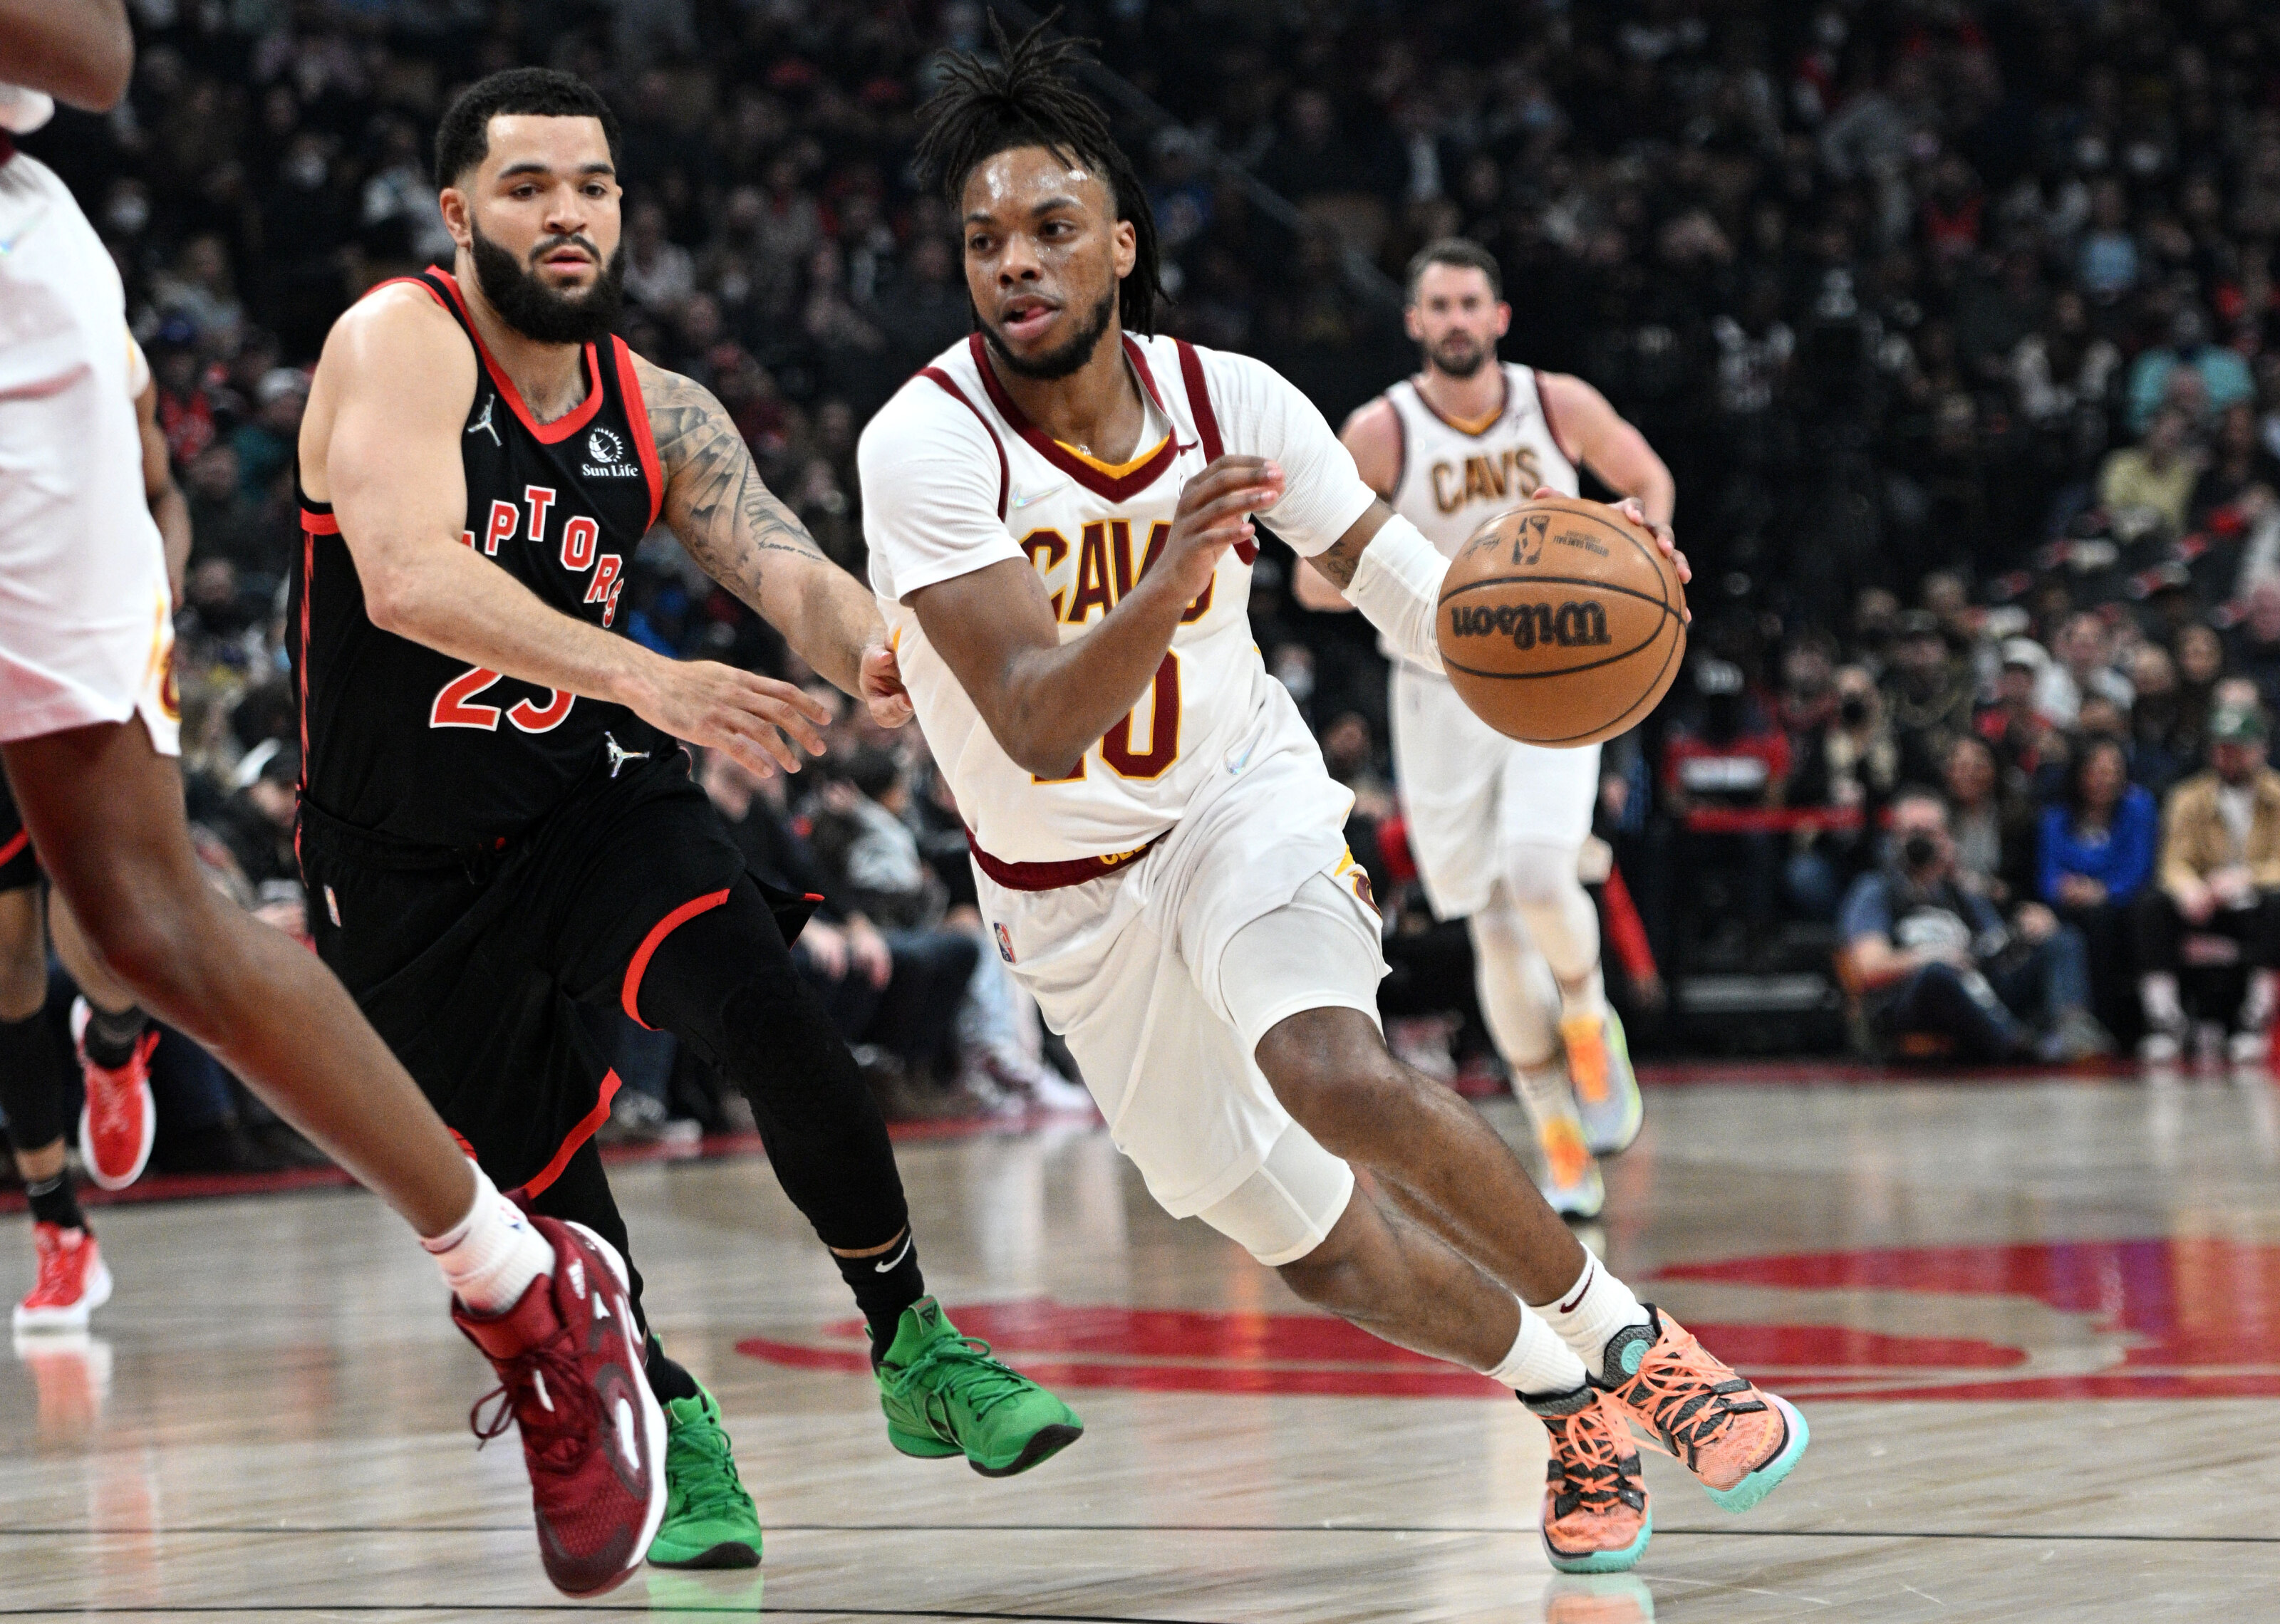 Cavs guard Darius Garland has earned the league's attention